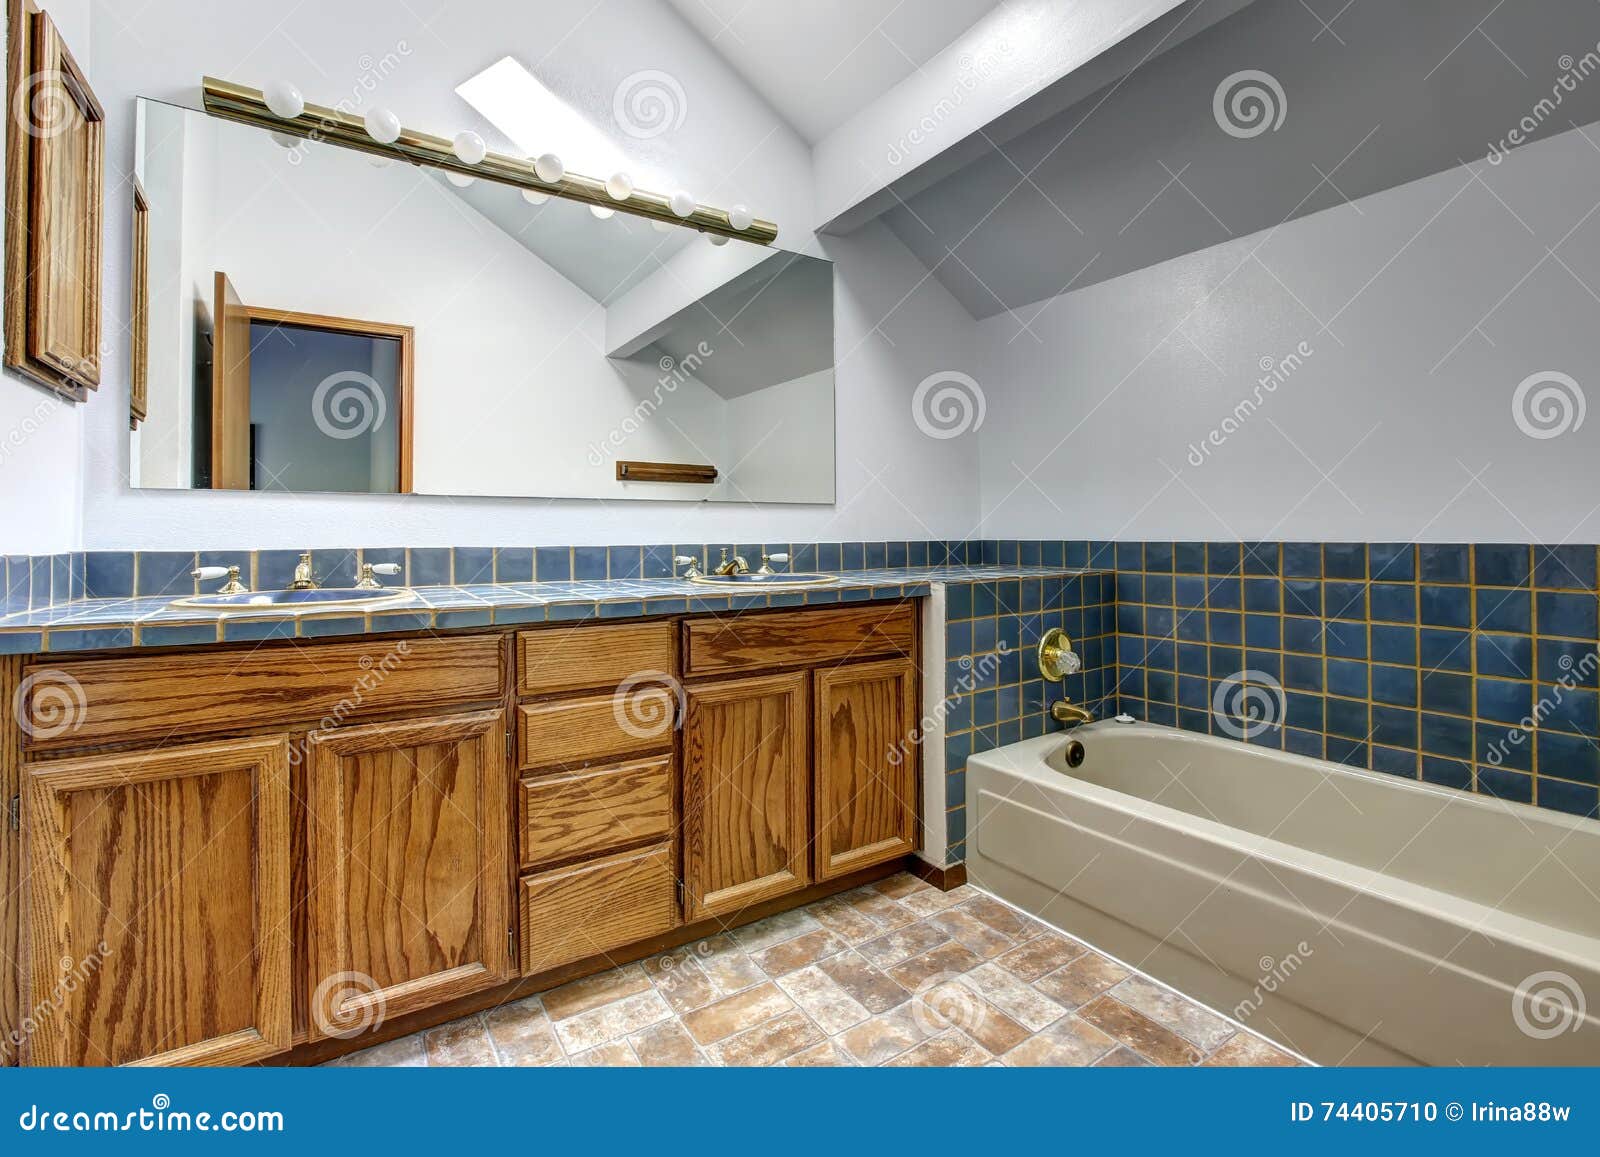 Bright Bathroom With Vaulted Ceiling And Blue Tile Wall Trim Stock